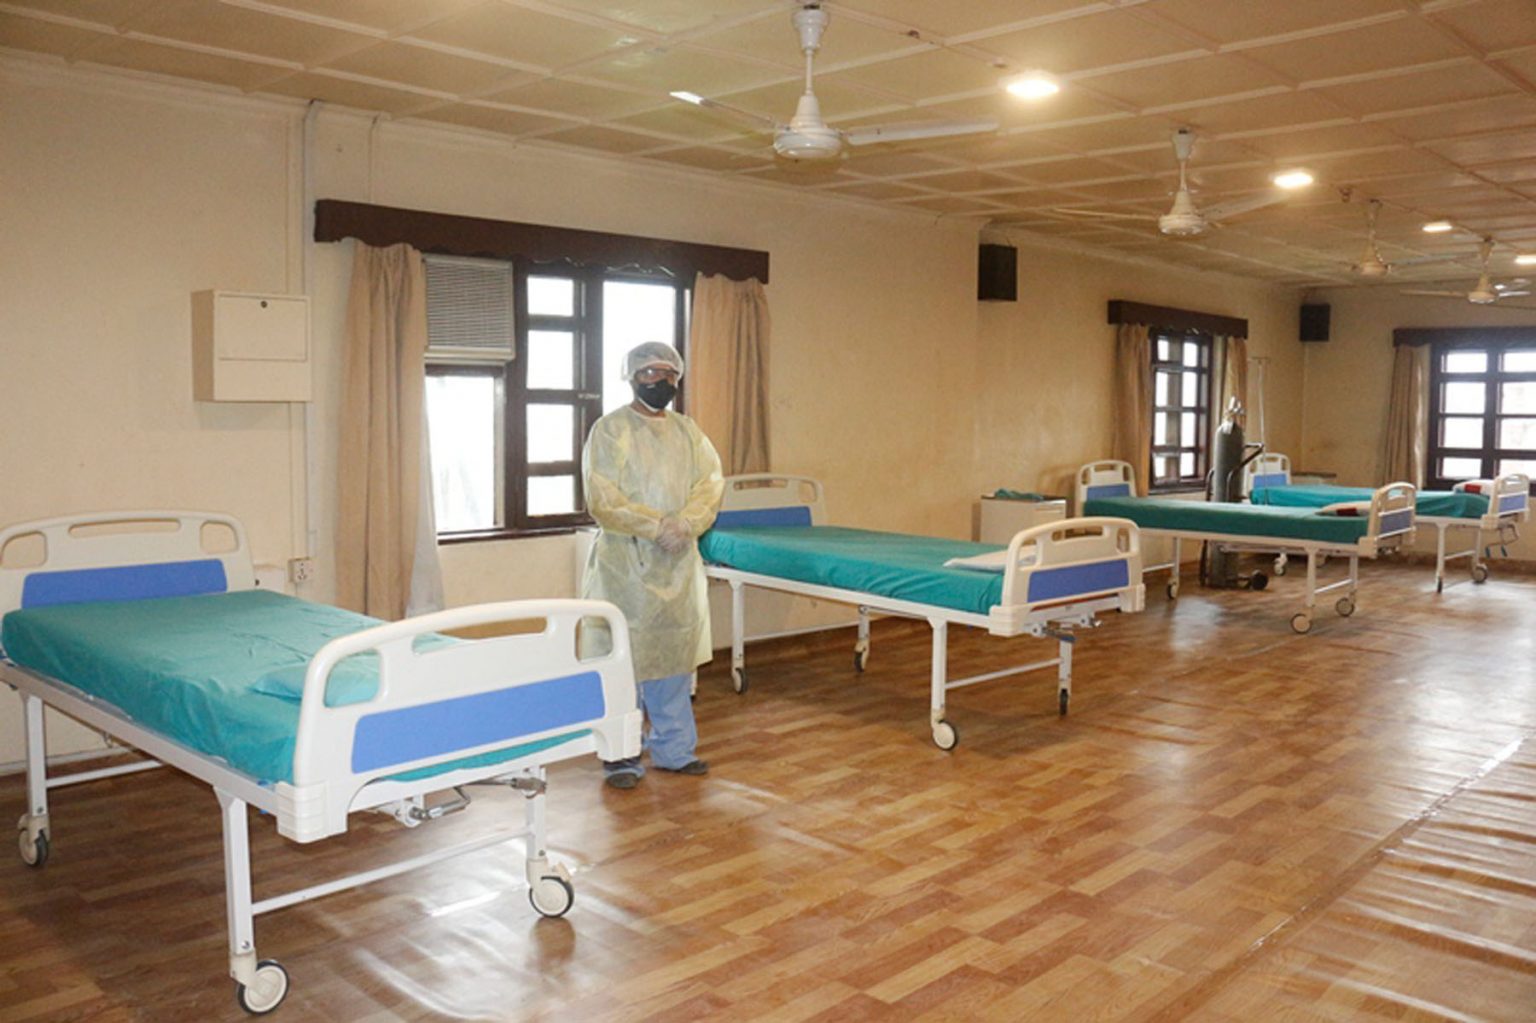 Isolation wards being extended in Tanahun